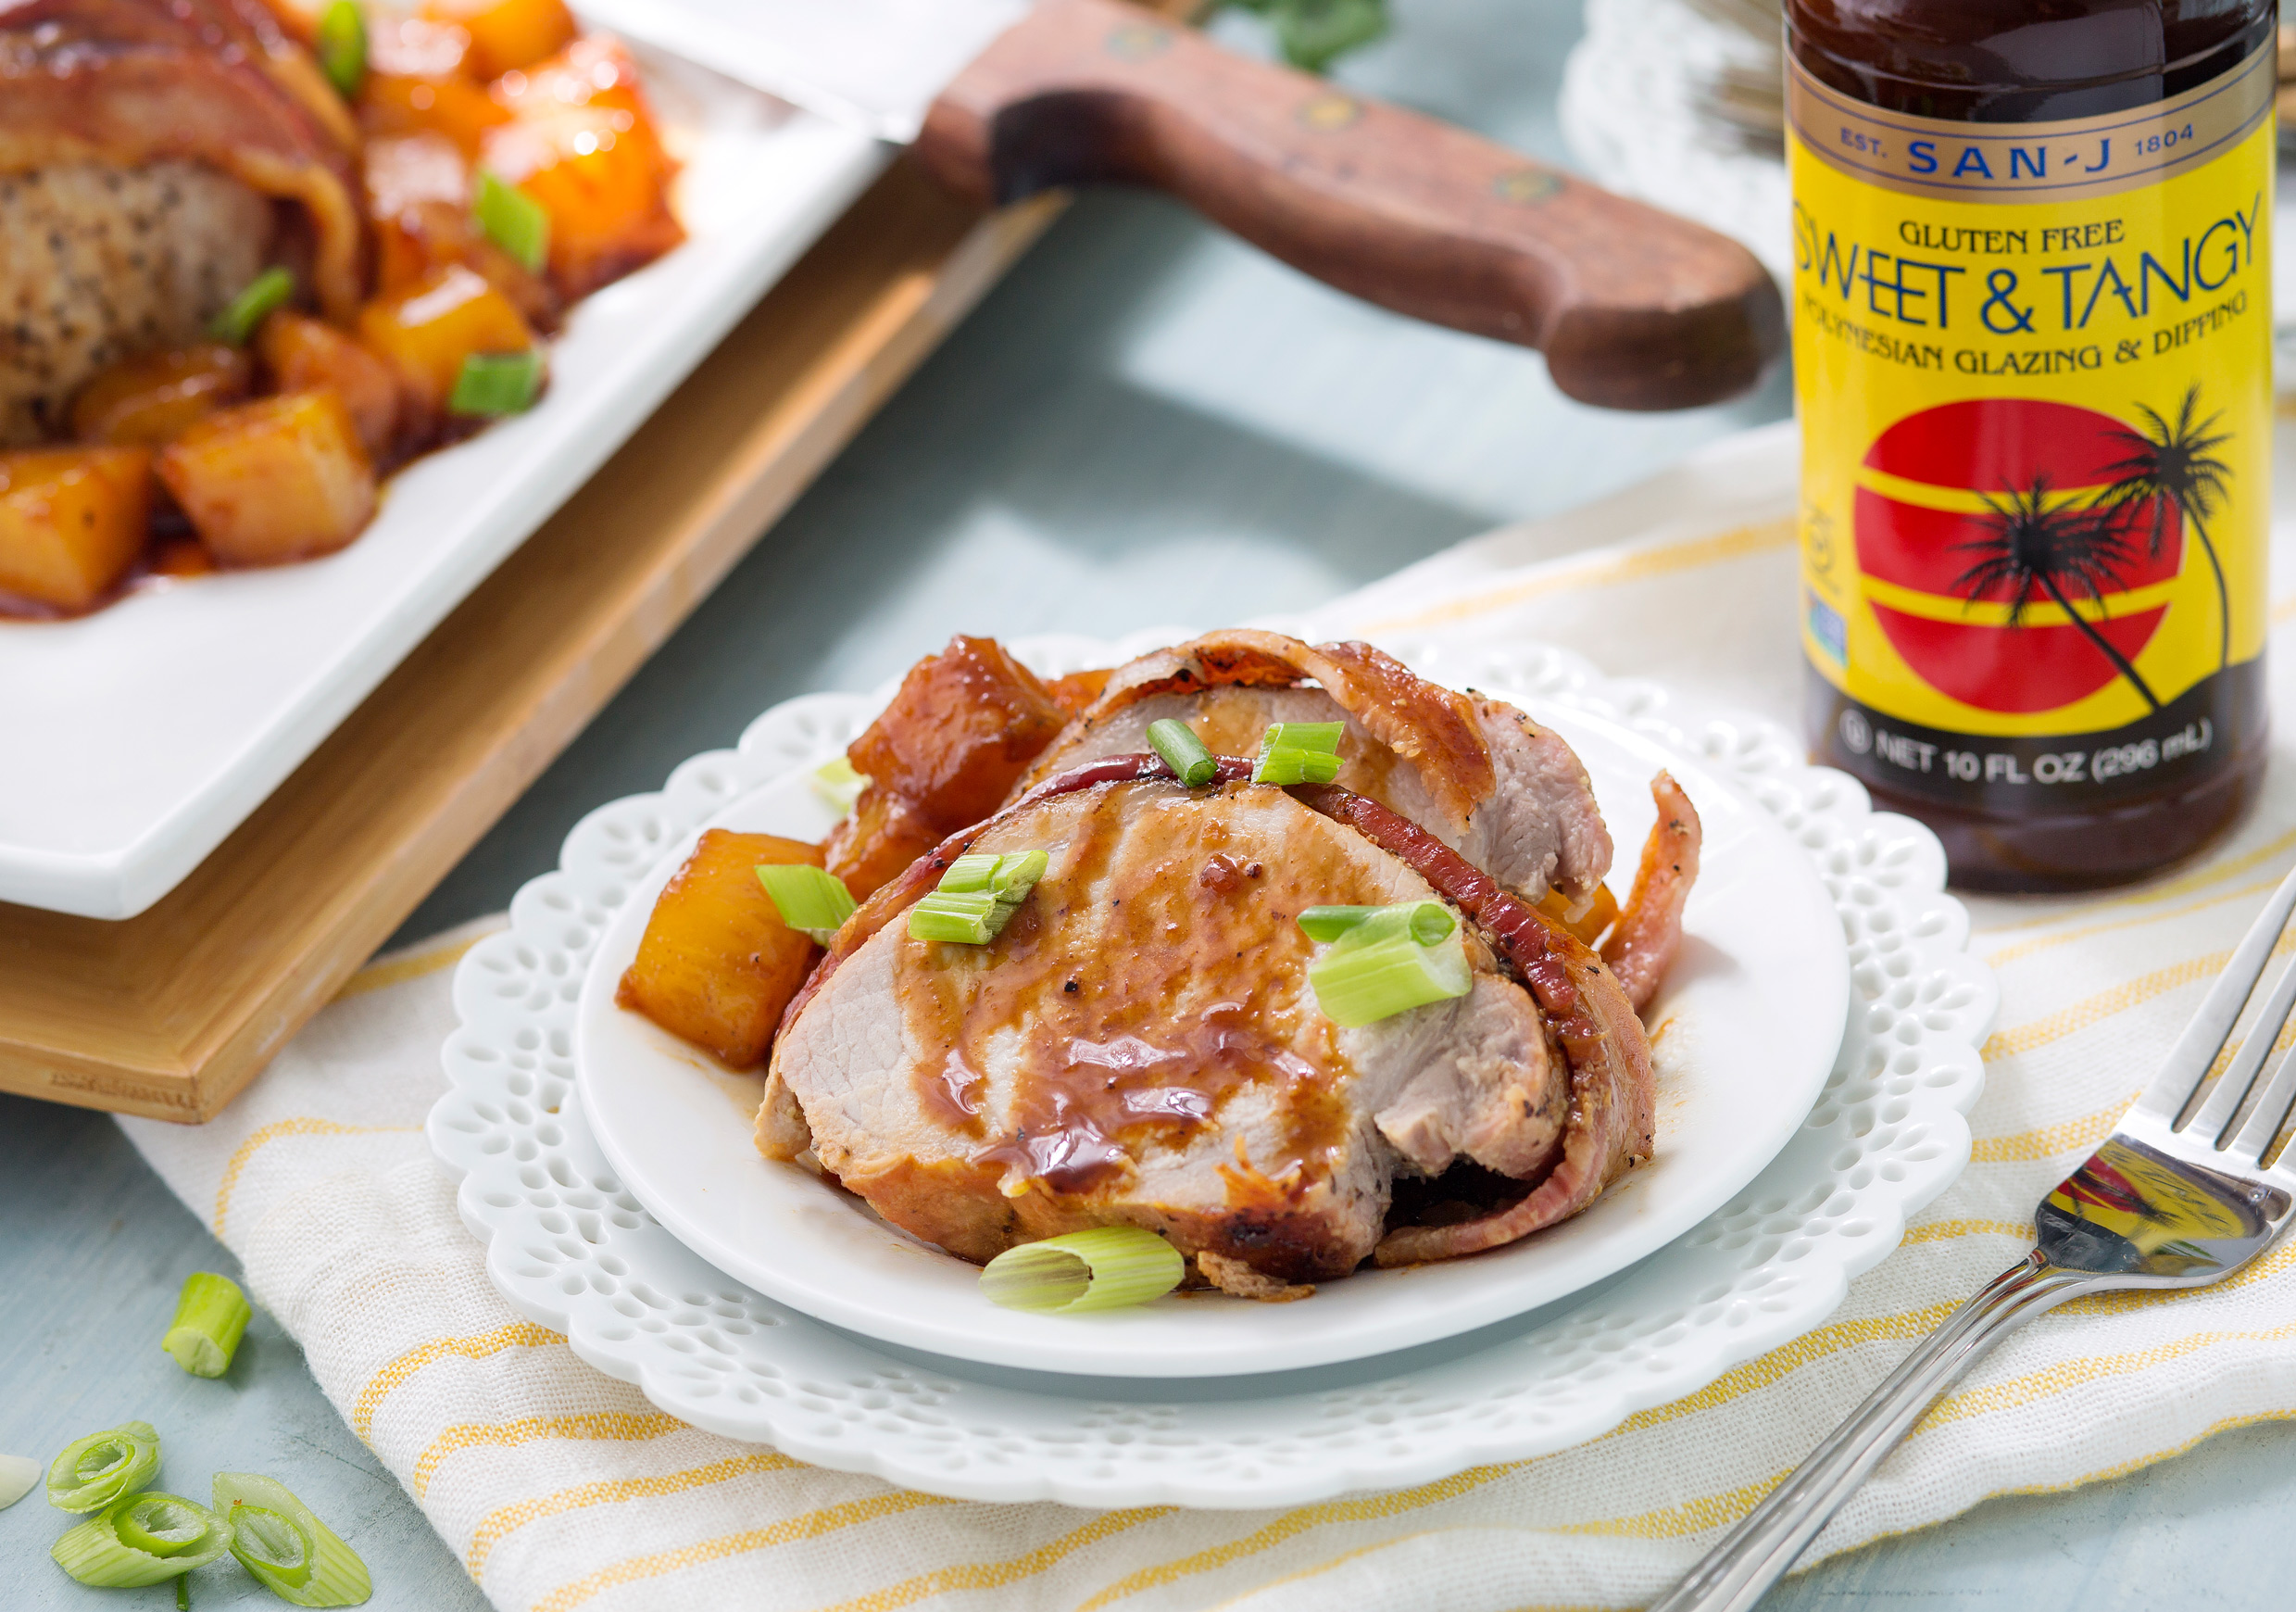 A spread on a table with bacon and pineapple pork roast next to a bottle of San-J Sweet & Tangy soy sauce